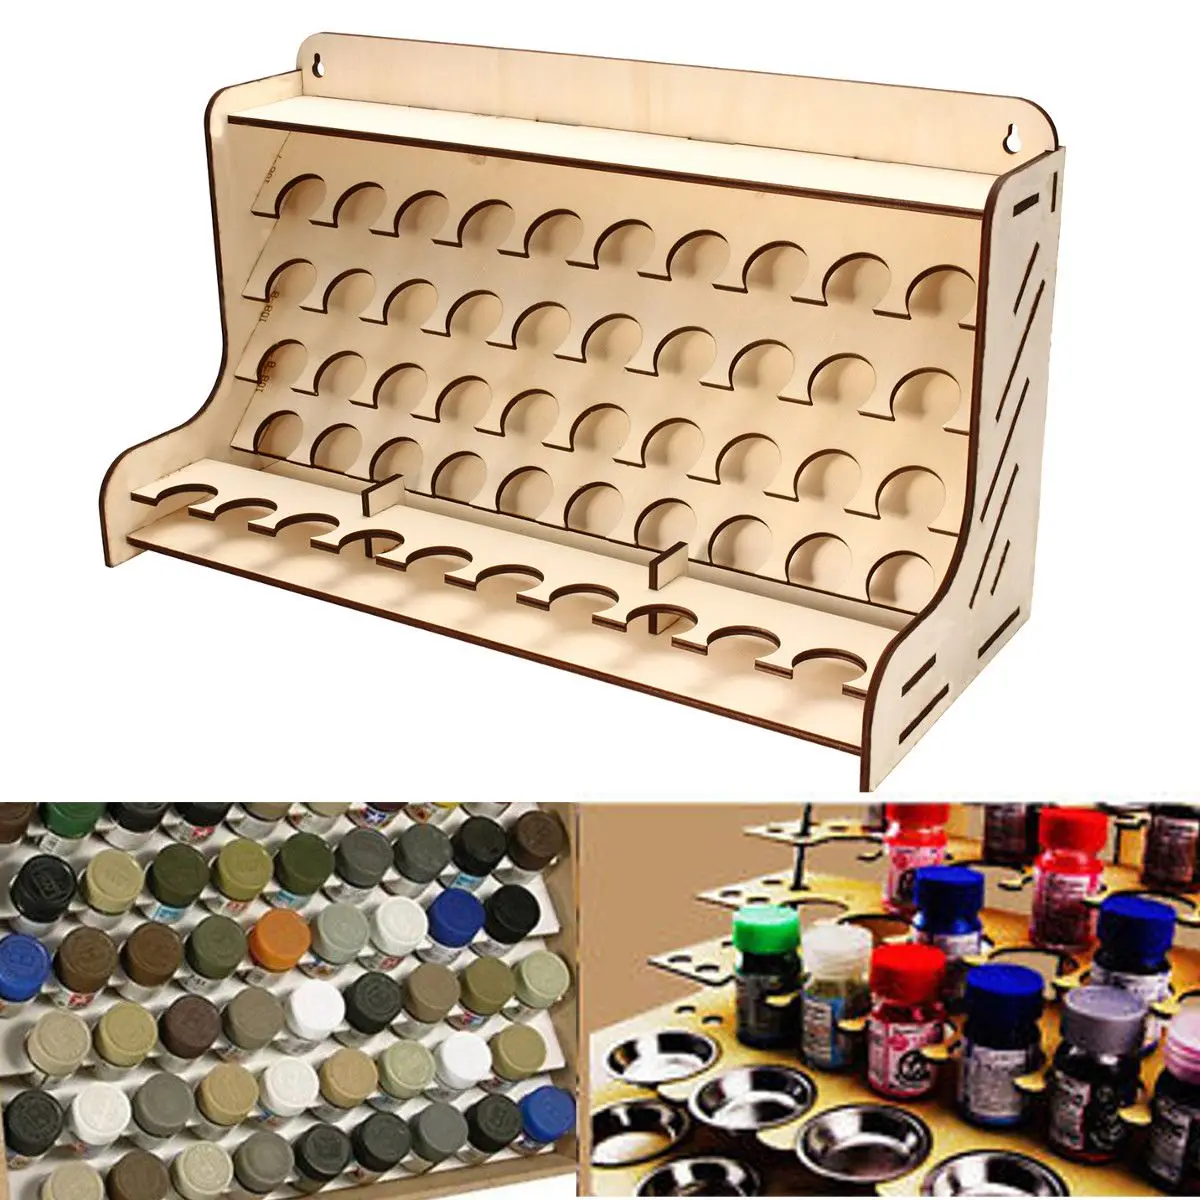 New Wooden Storage Rack For 50 Acrylic Tamiya Paint Mr Hobby Brush Color Plate 